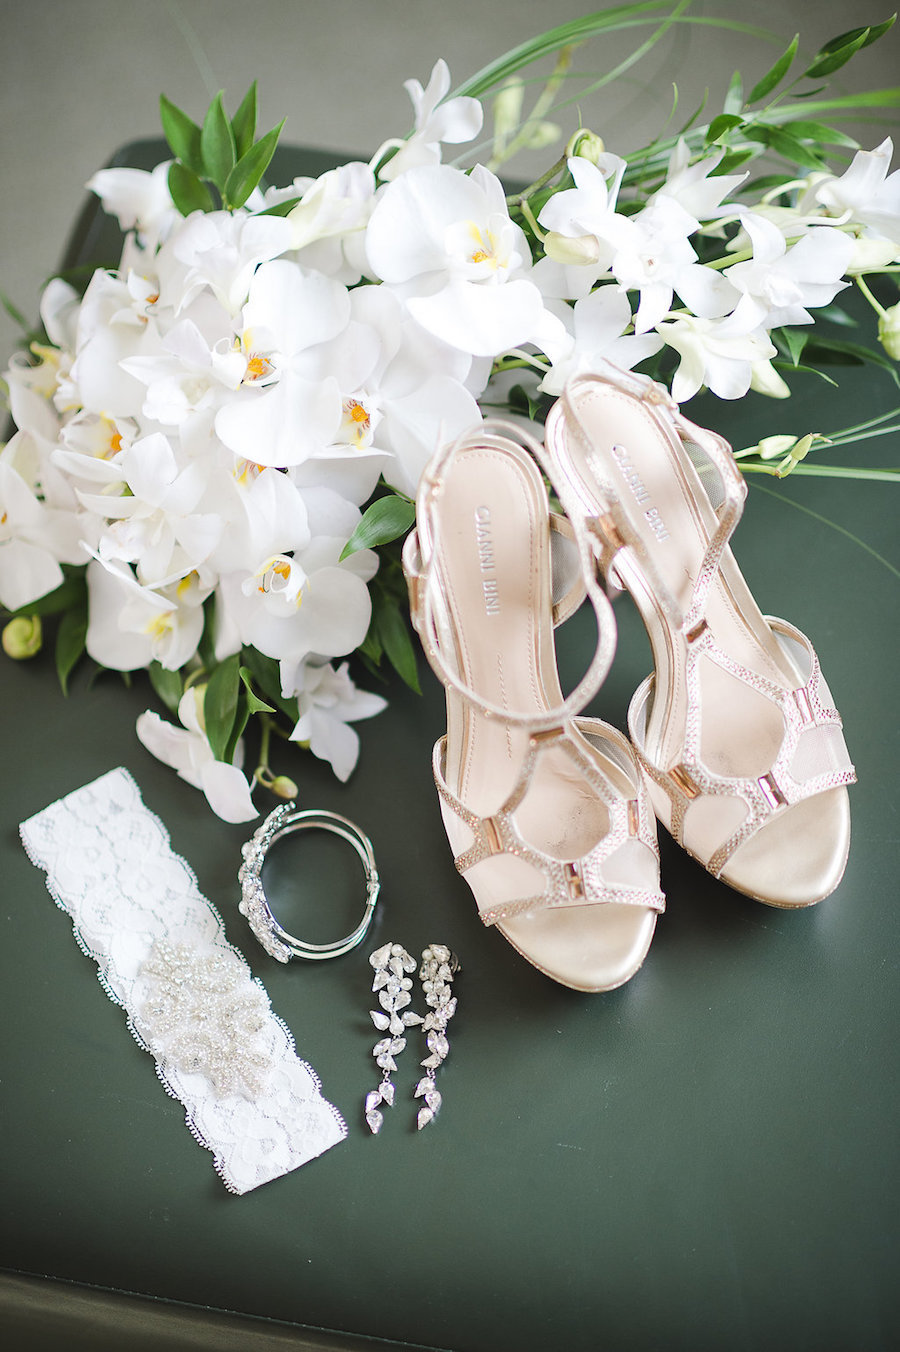 Getting Ready: Bride's Garter, Metallic Strappy Wedding Shoes, Jewelry with White Wedding Bouquet | Tampa Wedding Photographer Marc Edwards Photographs